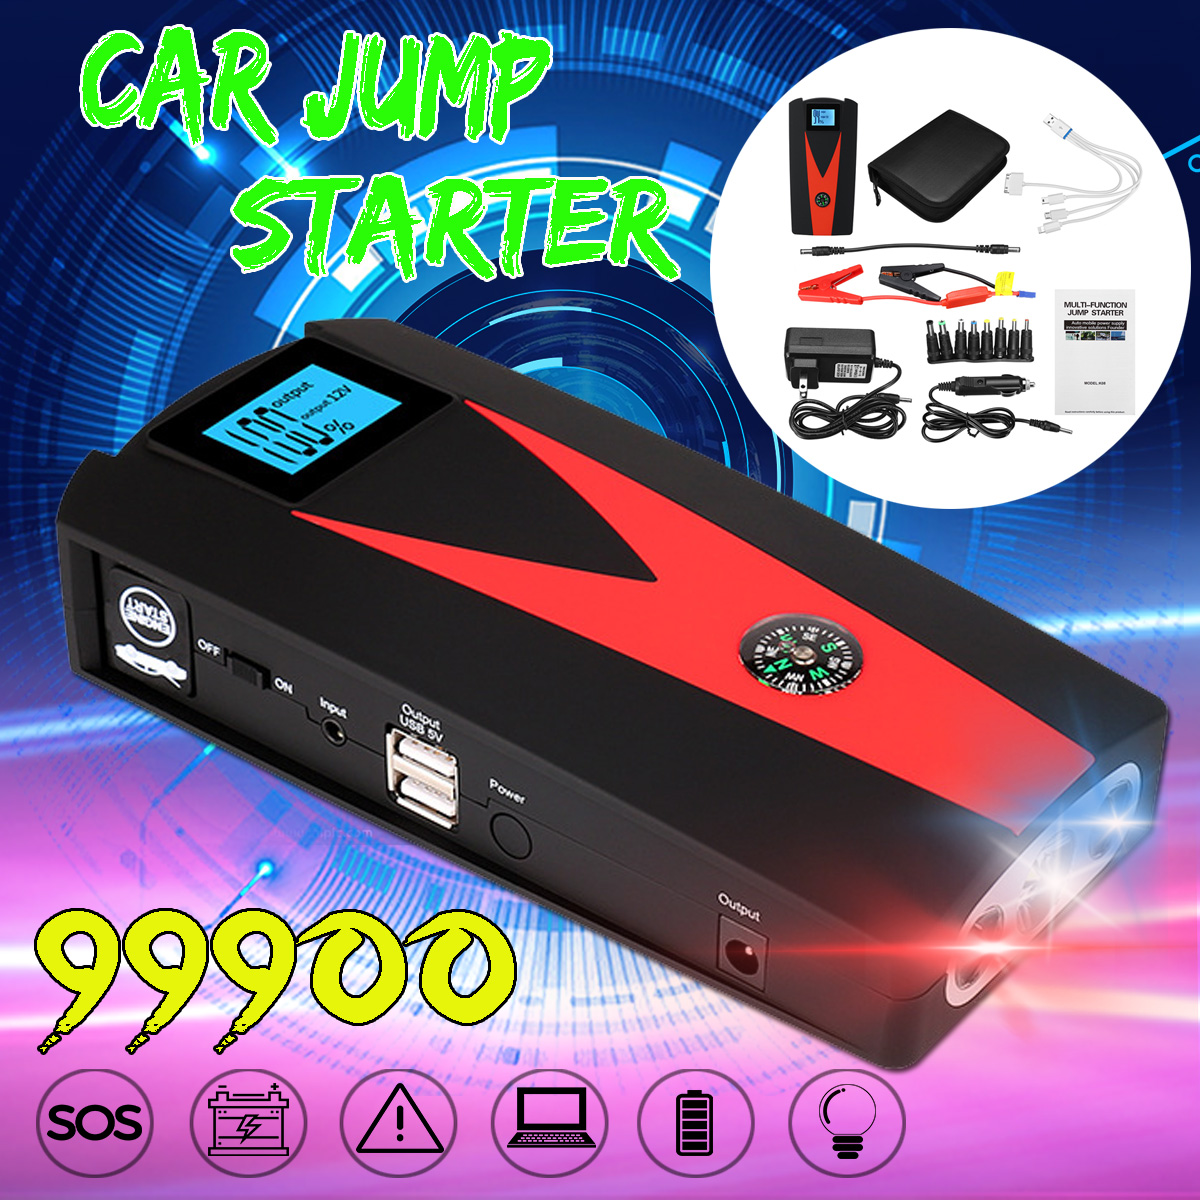 99900-mAh-Dual-USB-Car-Jump-Starter-LCD-Auto-Battery-Booster-Portable-Power-Pack-with-Jumper-Cables-1421905-2